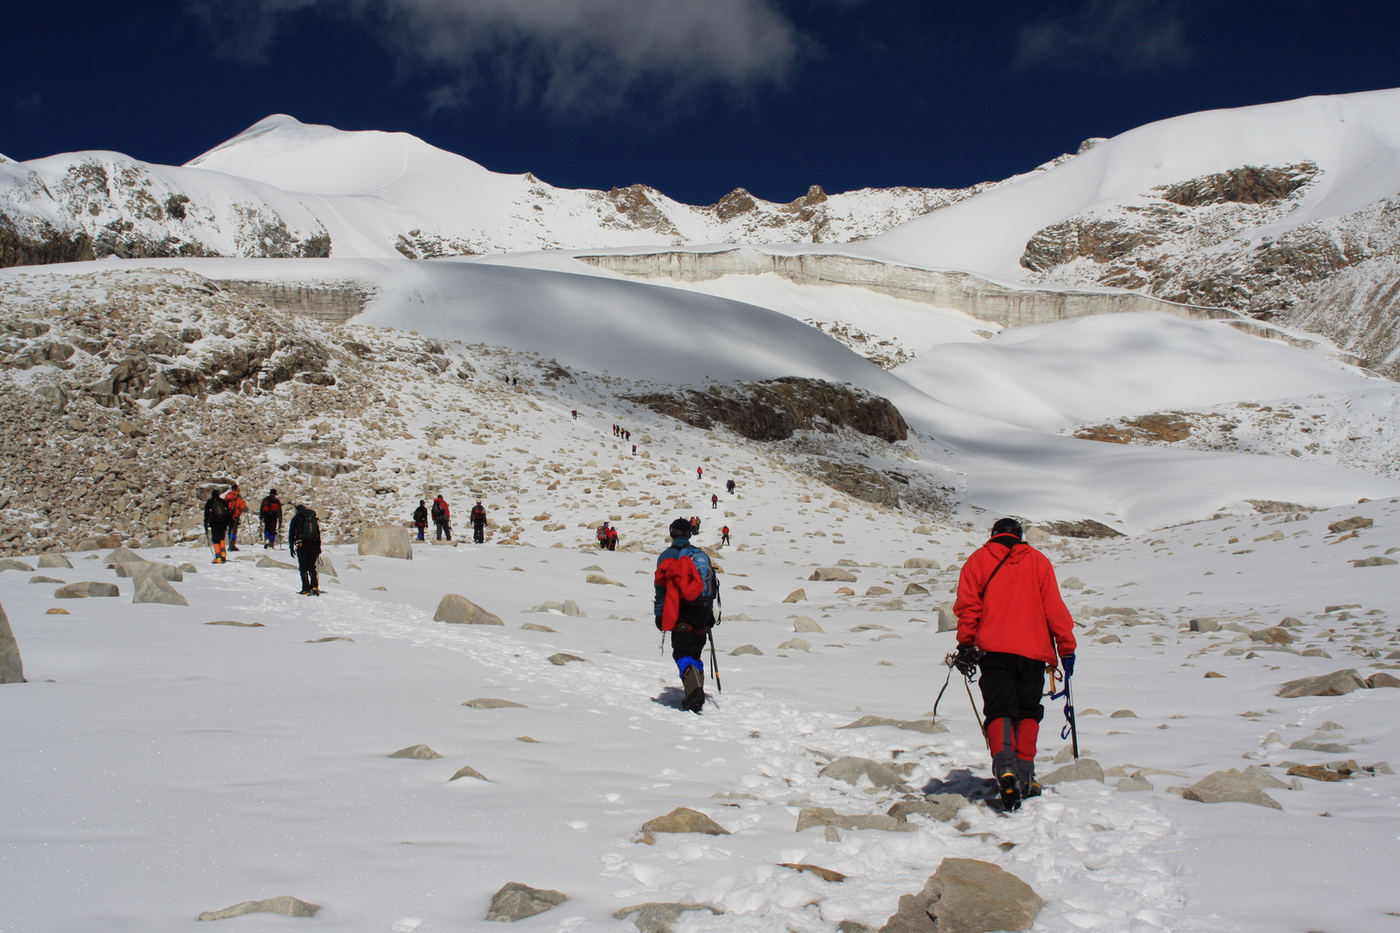 Tibet Receives 73 Foreign Mountaineering Groups Last Year